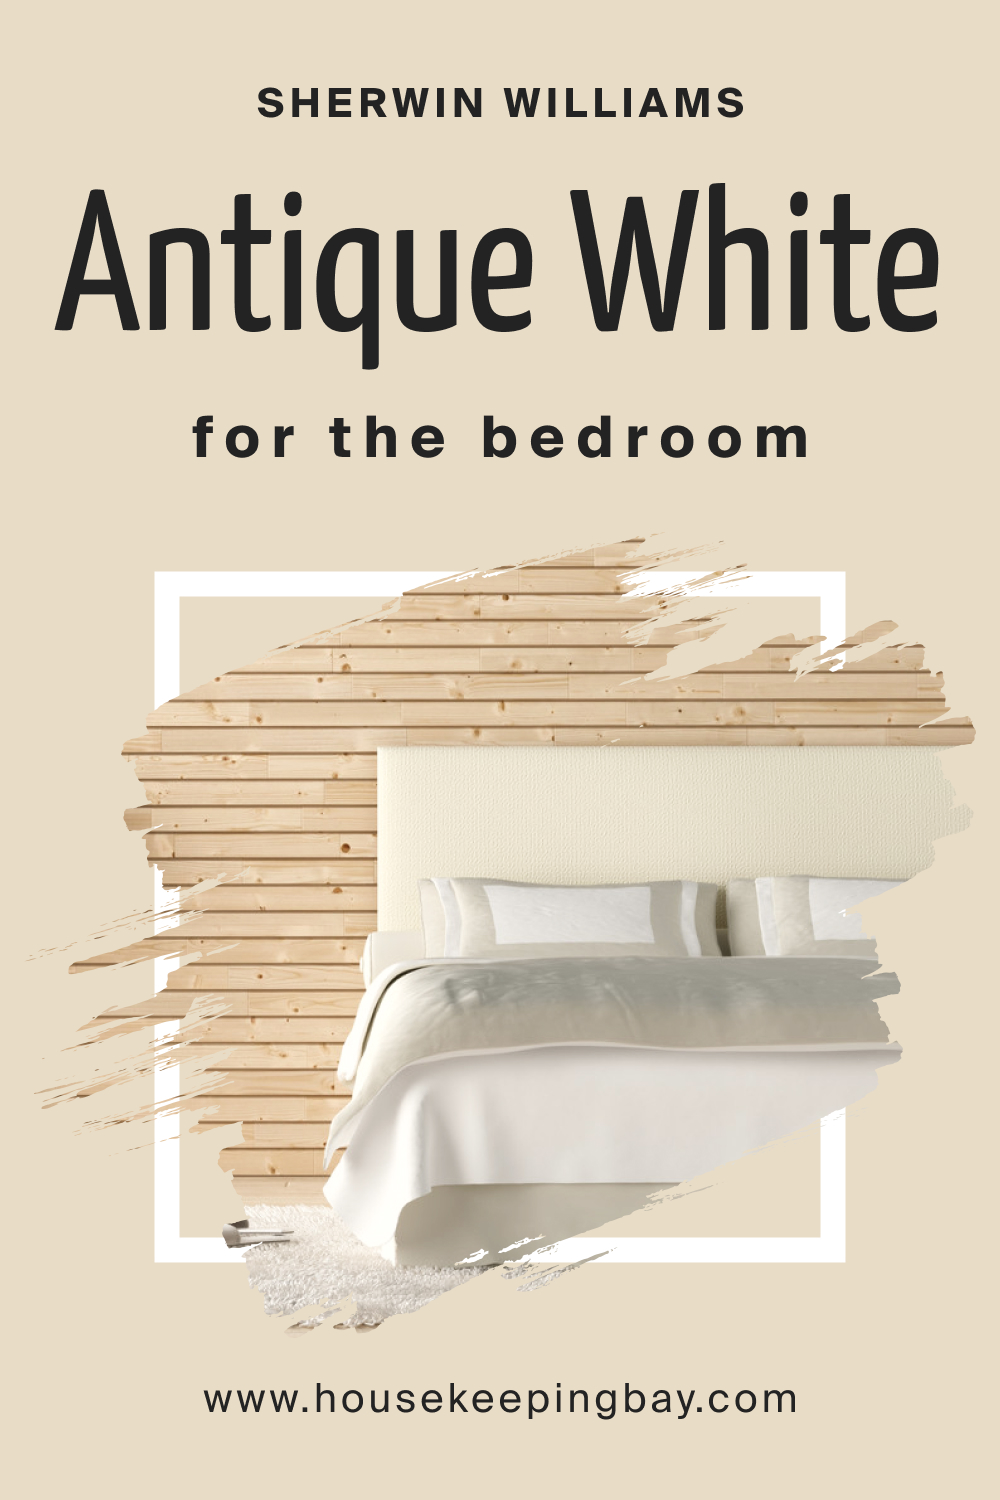 Sherwin Williams. SW Antique White For the bedroom